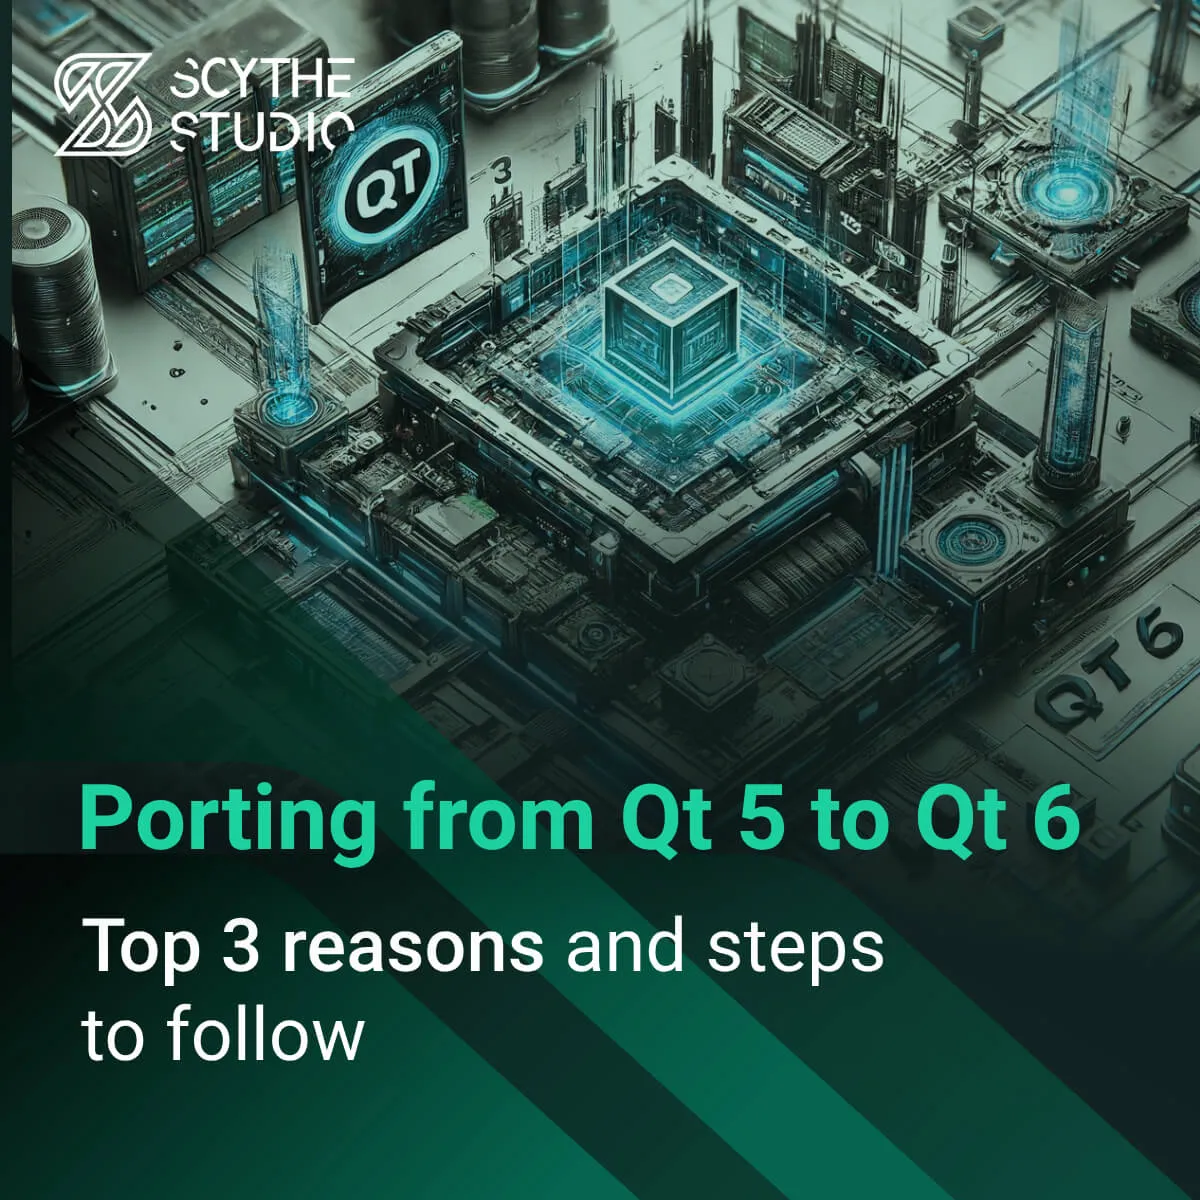 Porting from Qt 5 to Qt 6